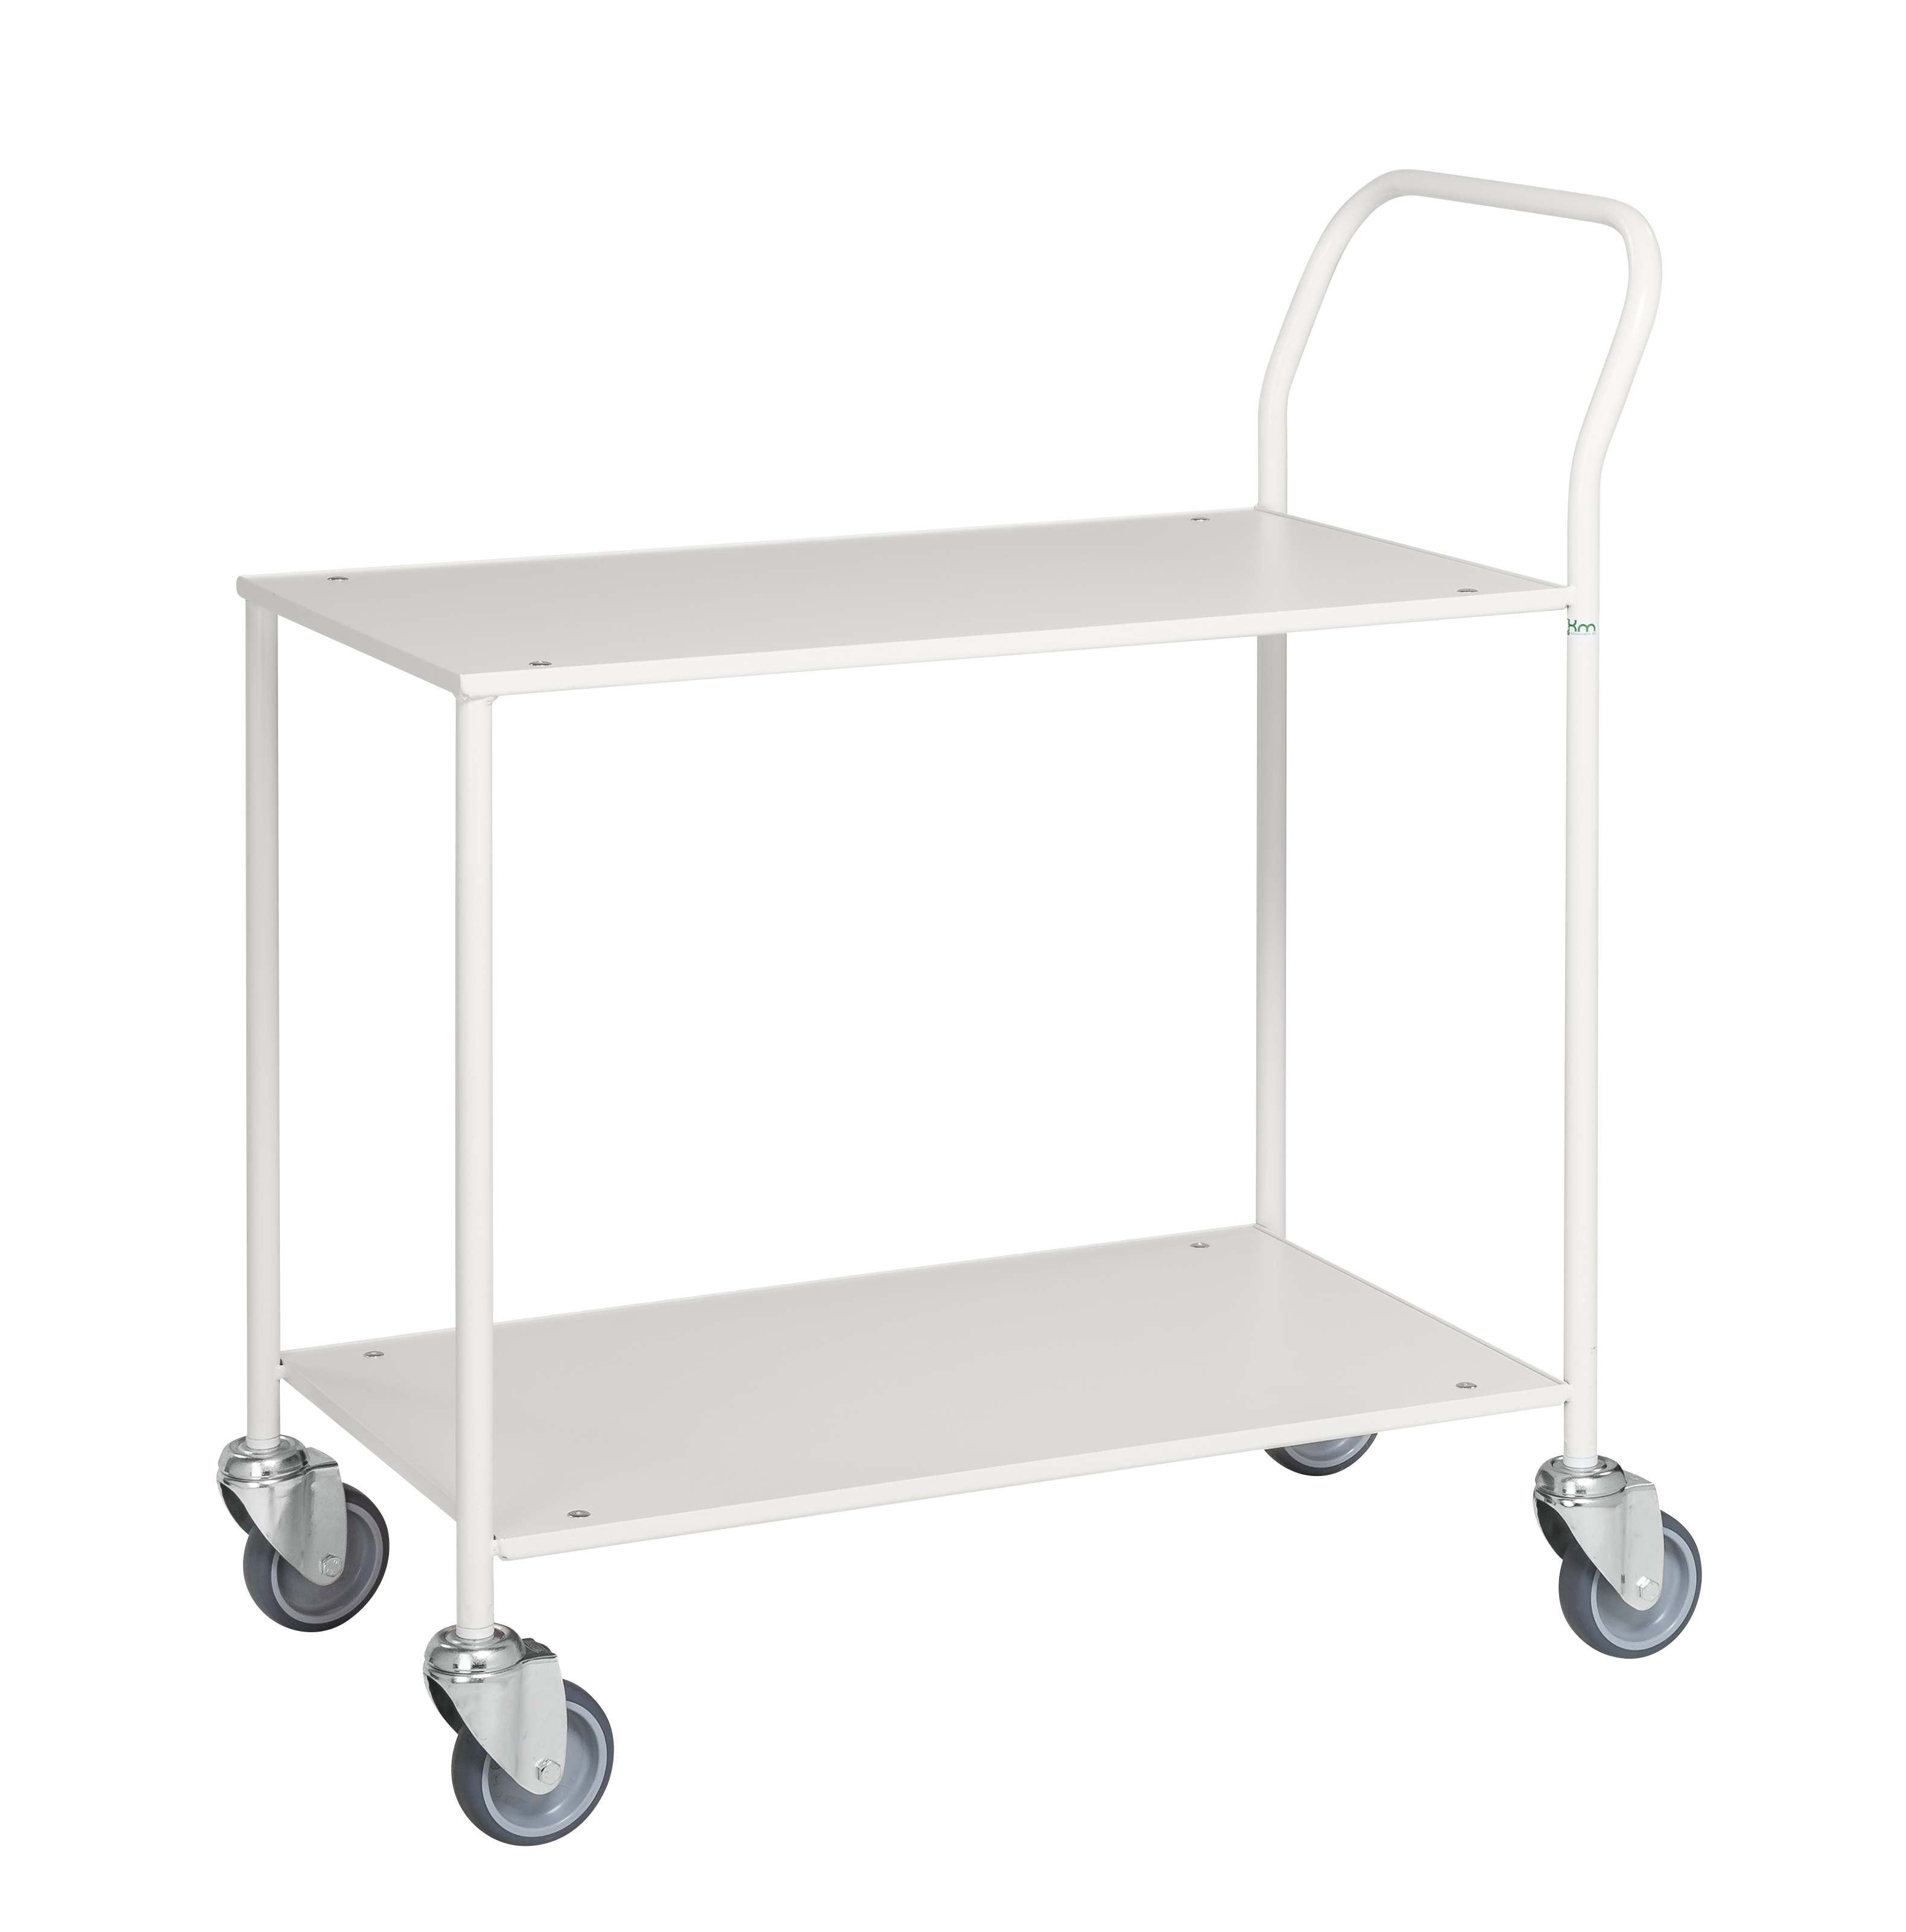 Small table trolley, fully welded KM173-6